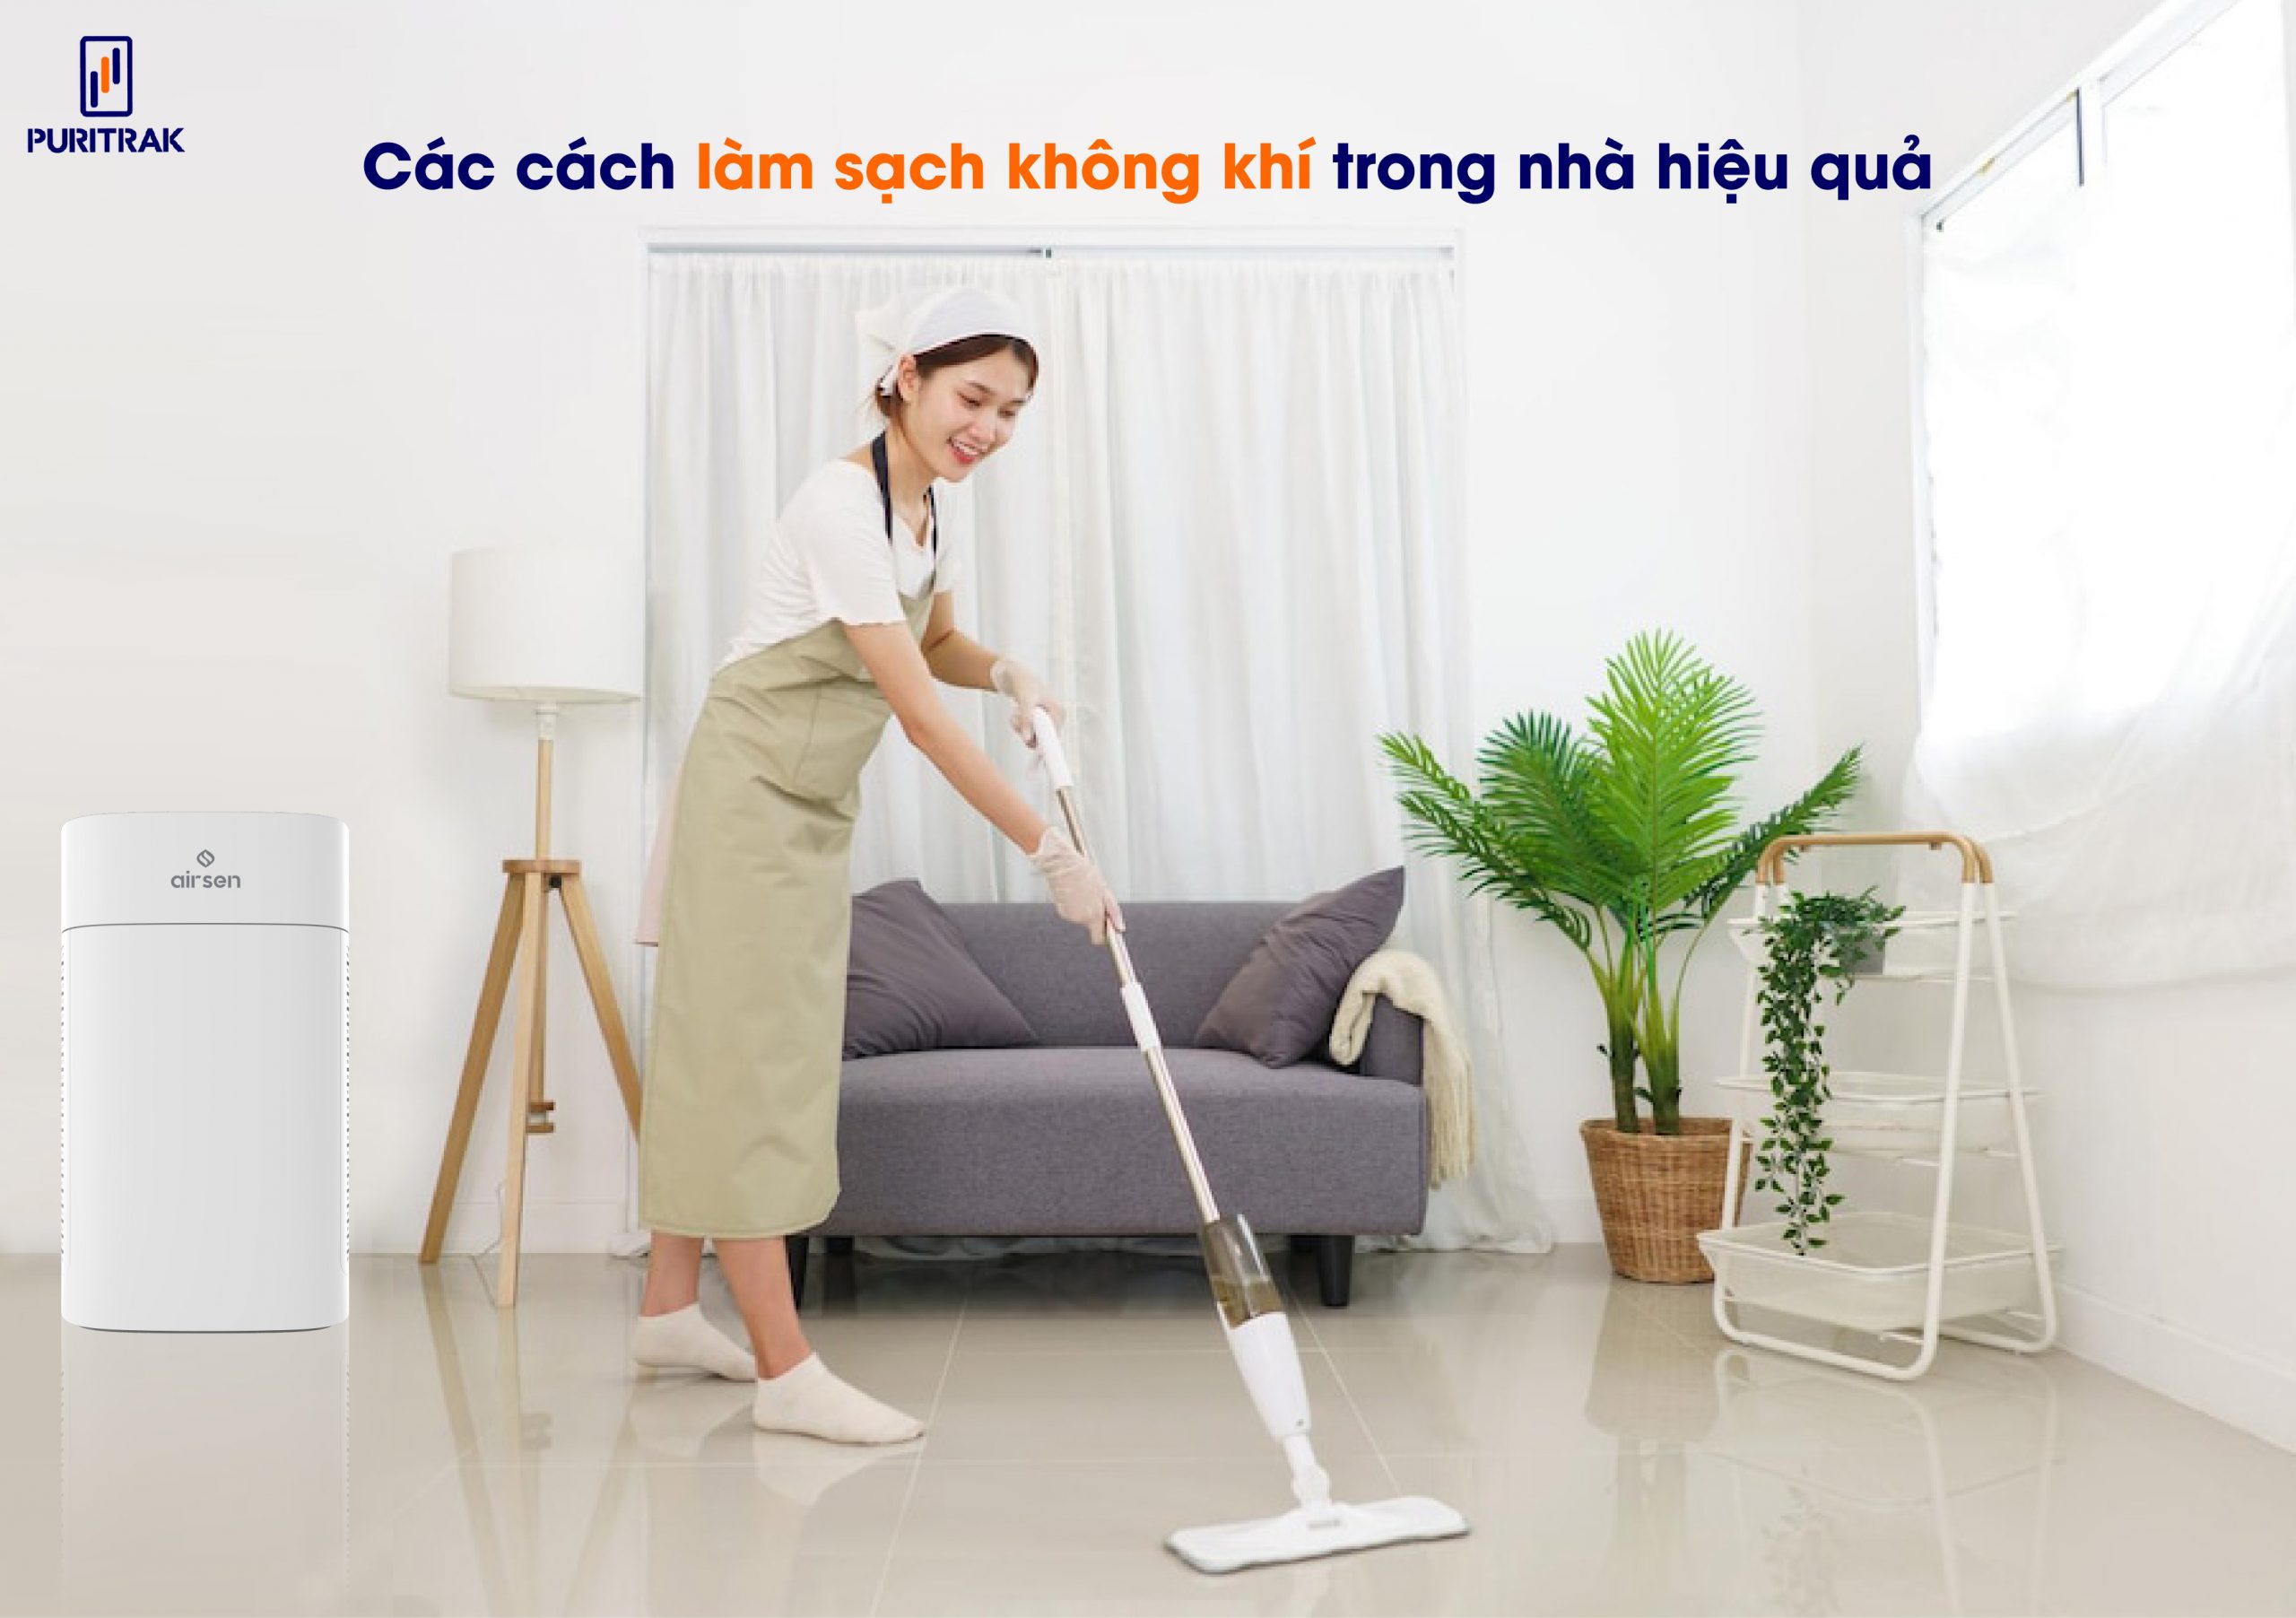 Clean the house regularly and regularly